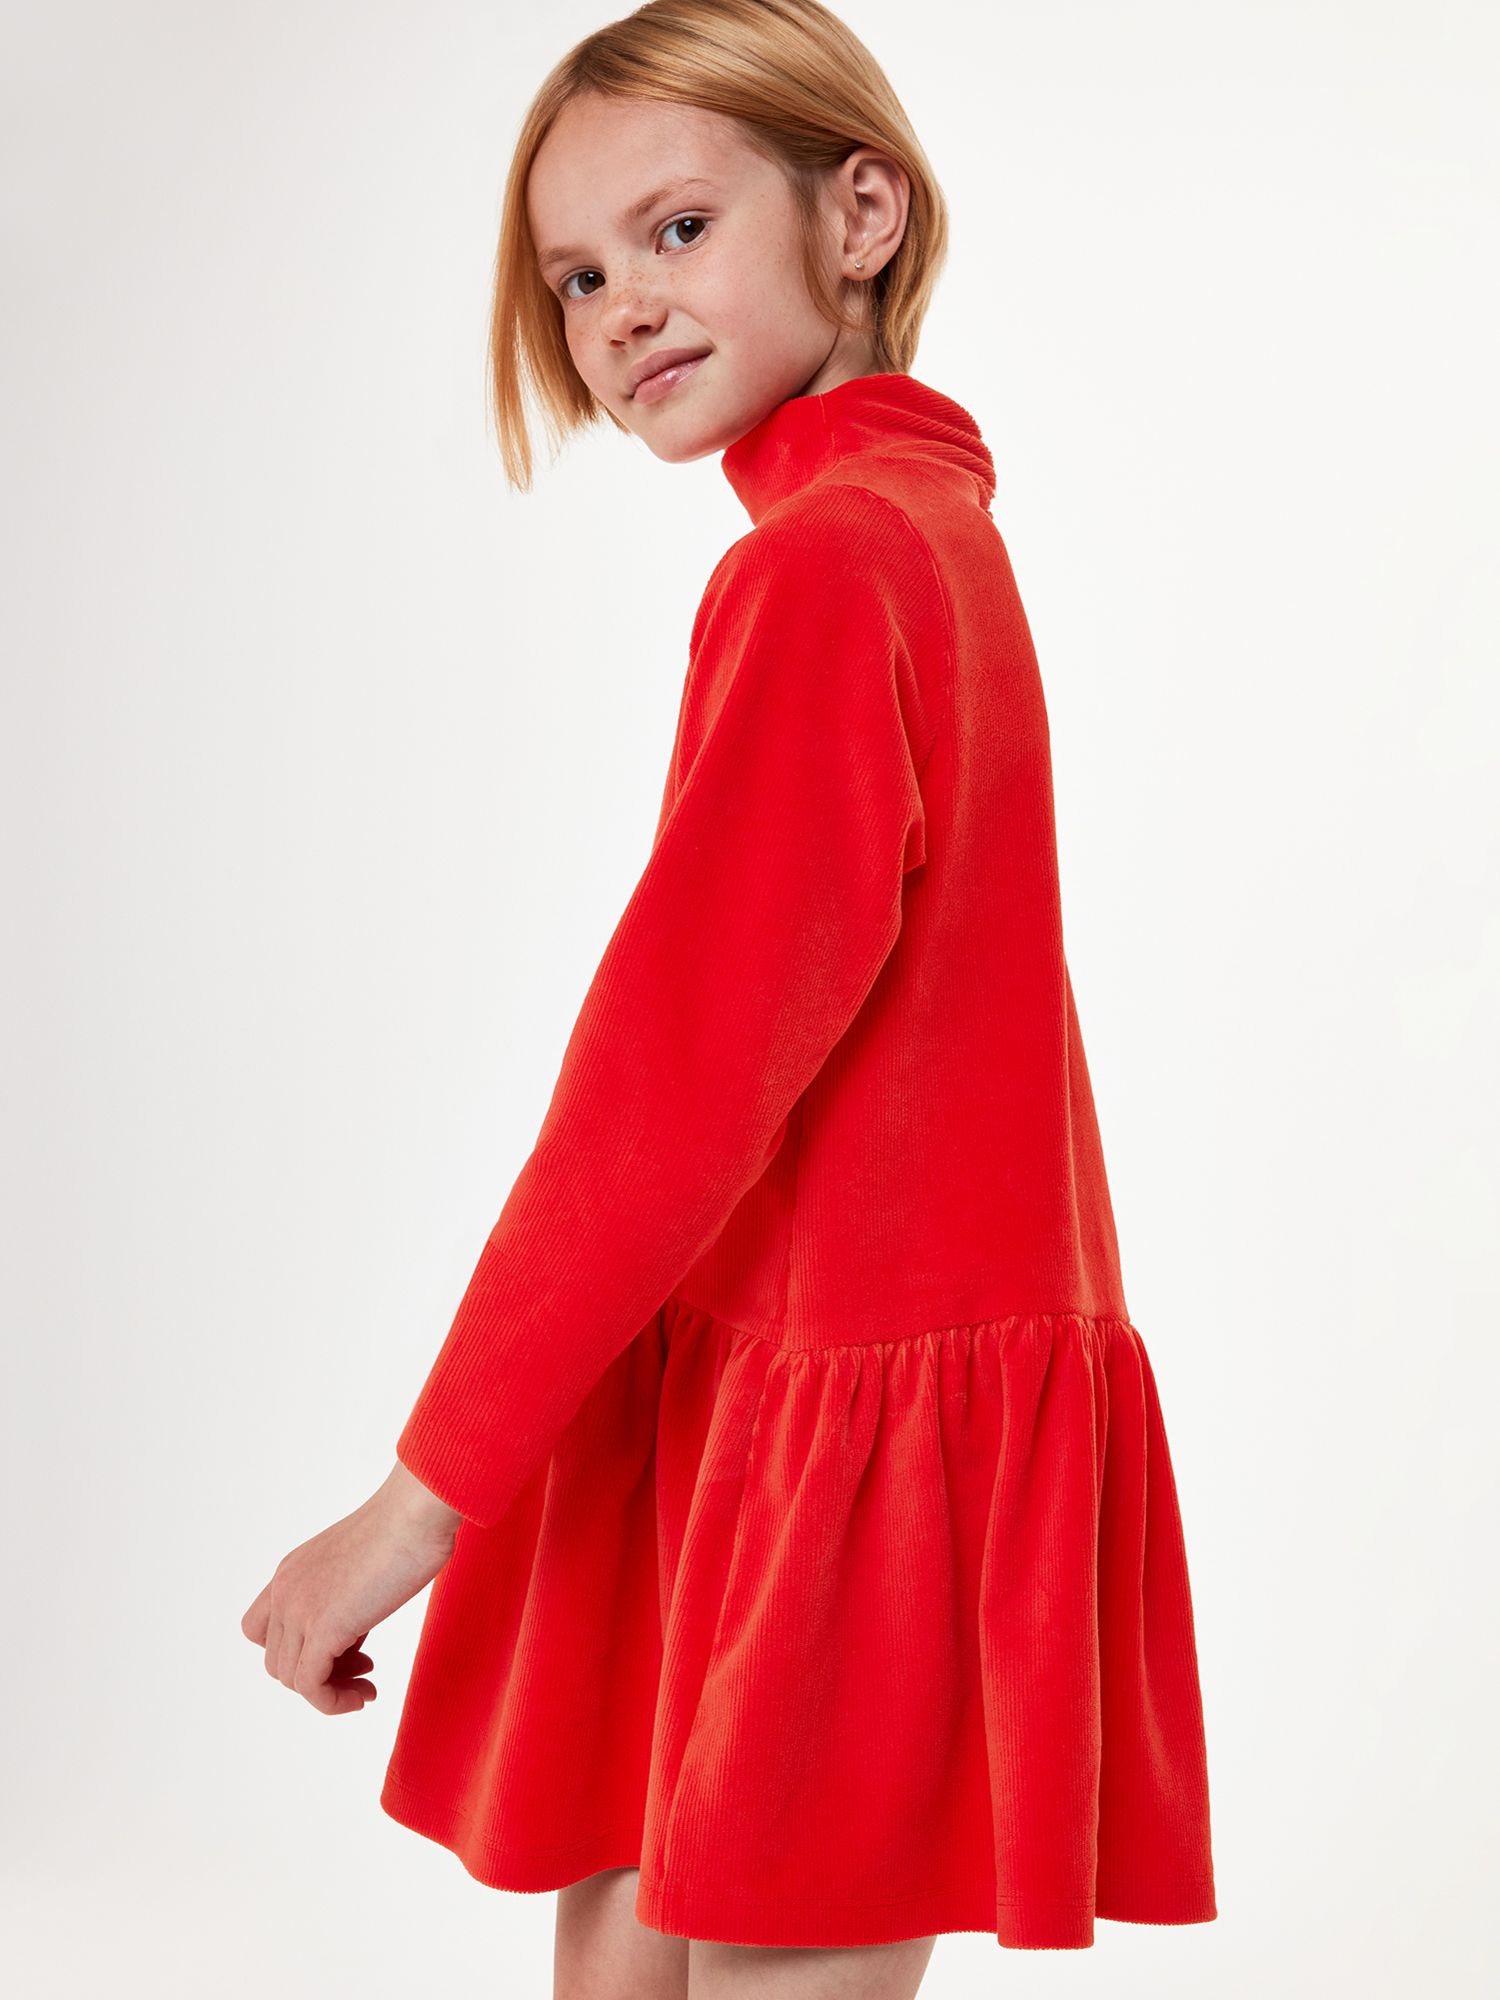 Whistles Kids' Corduroy Funnel Neck Jersey Dress, Red, 4-5 years